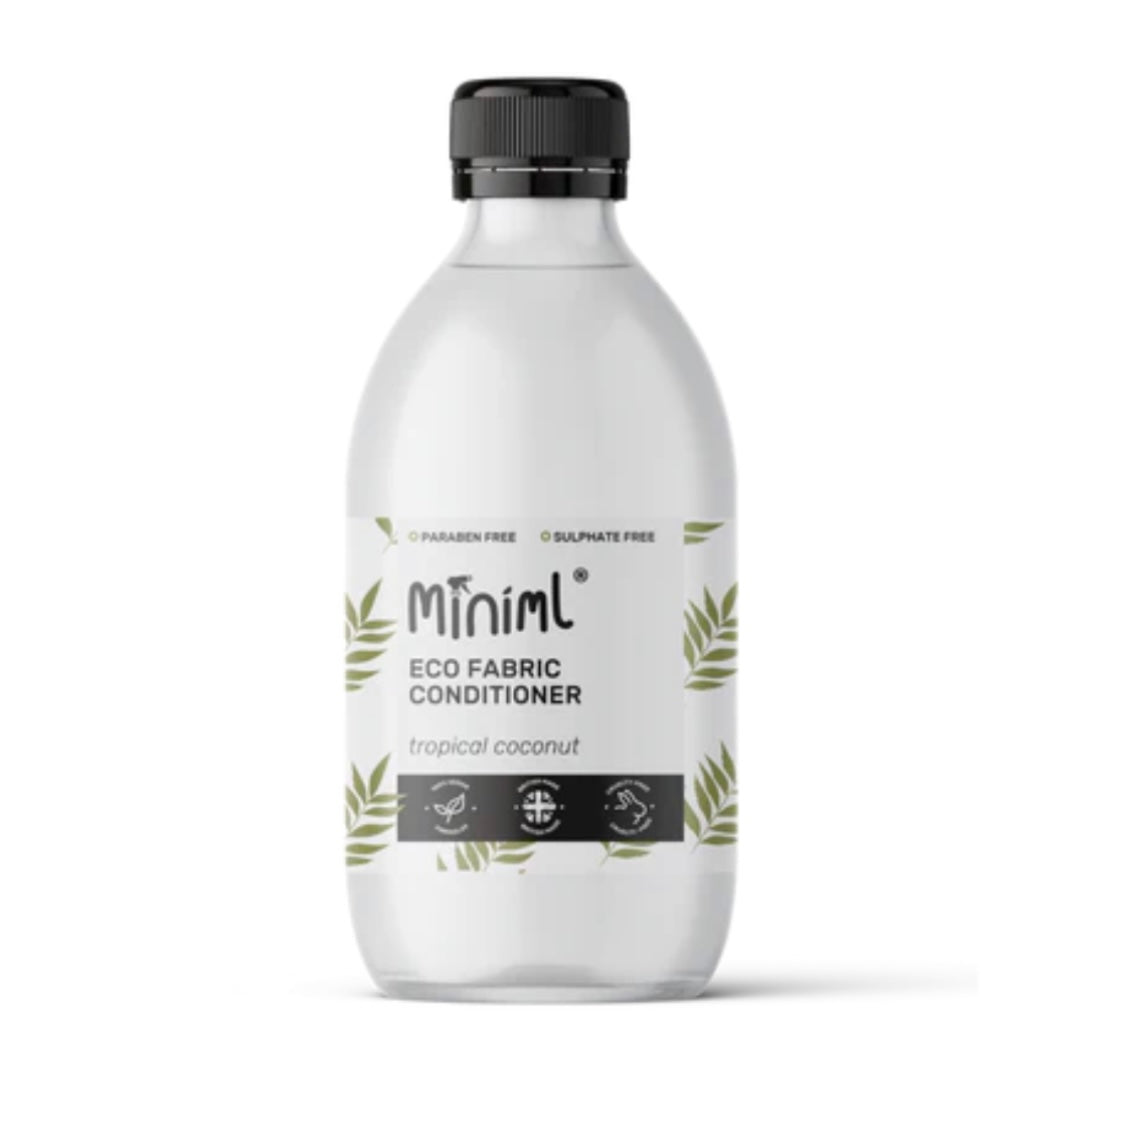 READY FILLED Fabric Conditioner in Glass bottle 500ml by Miniml